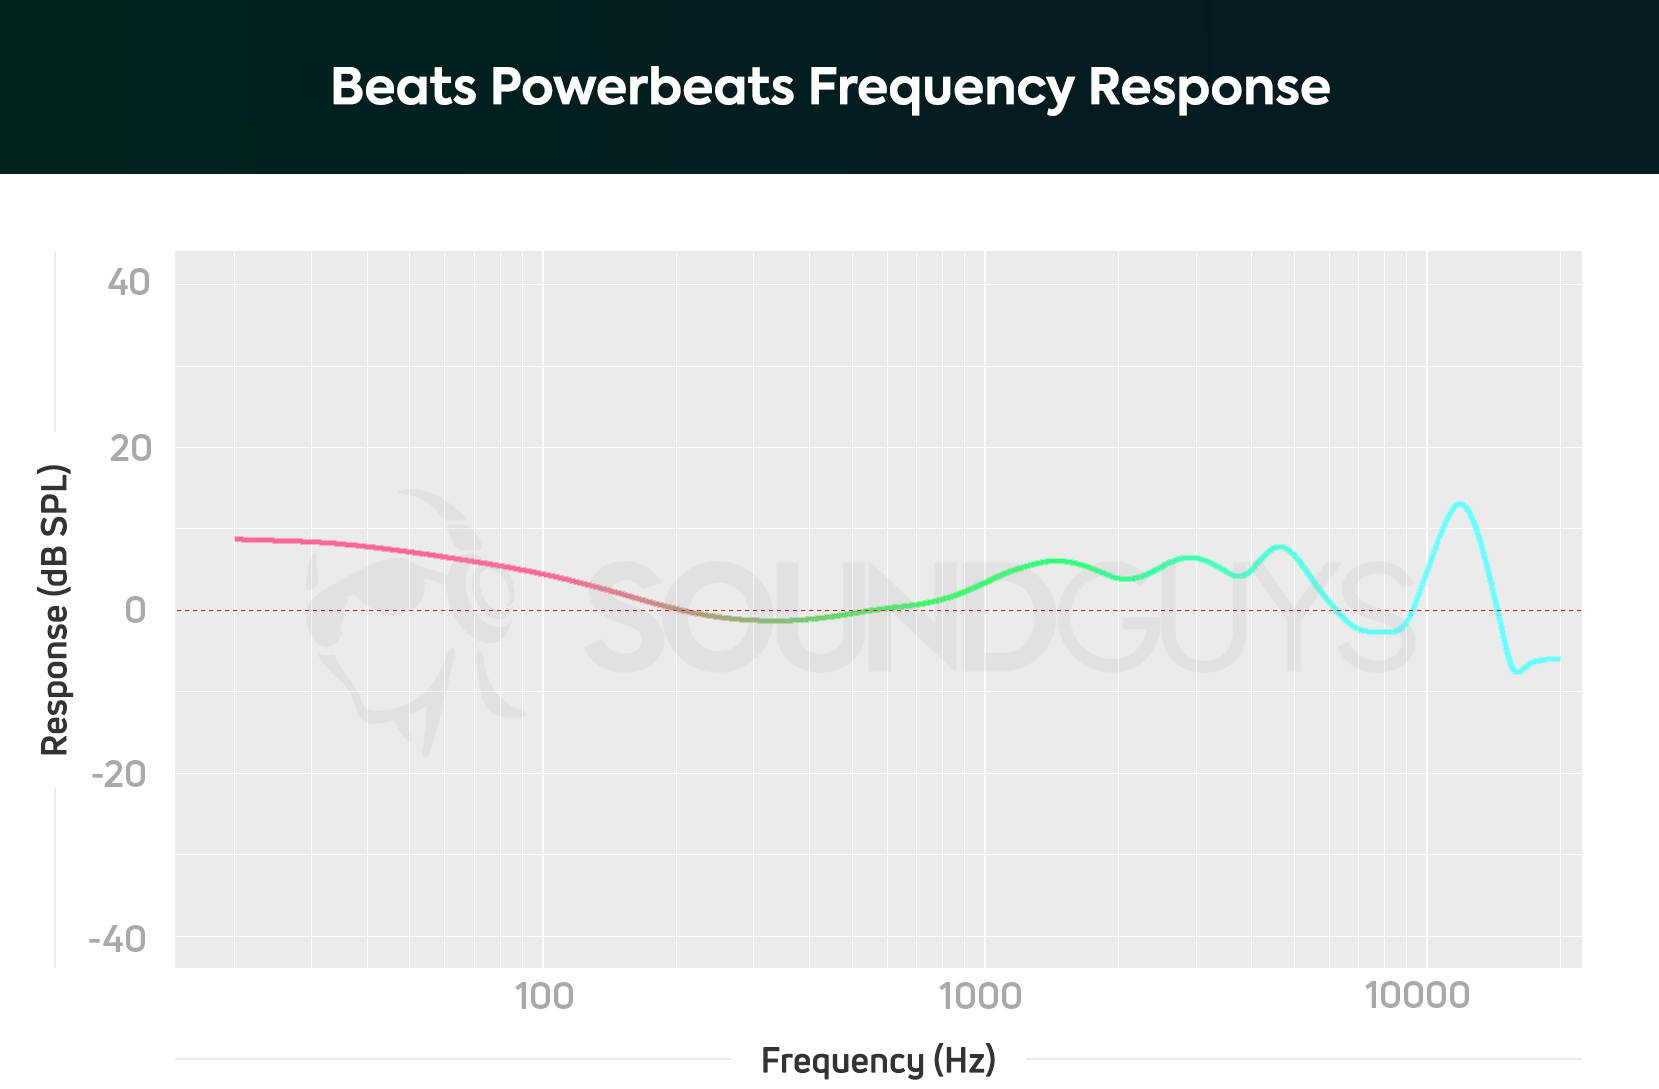 A chart depicts the Apple Beats Powerbeats frequency response with bass and treble frequencies amplified.